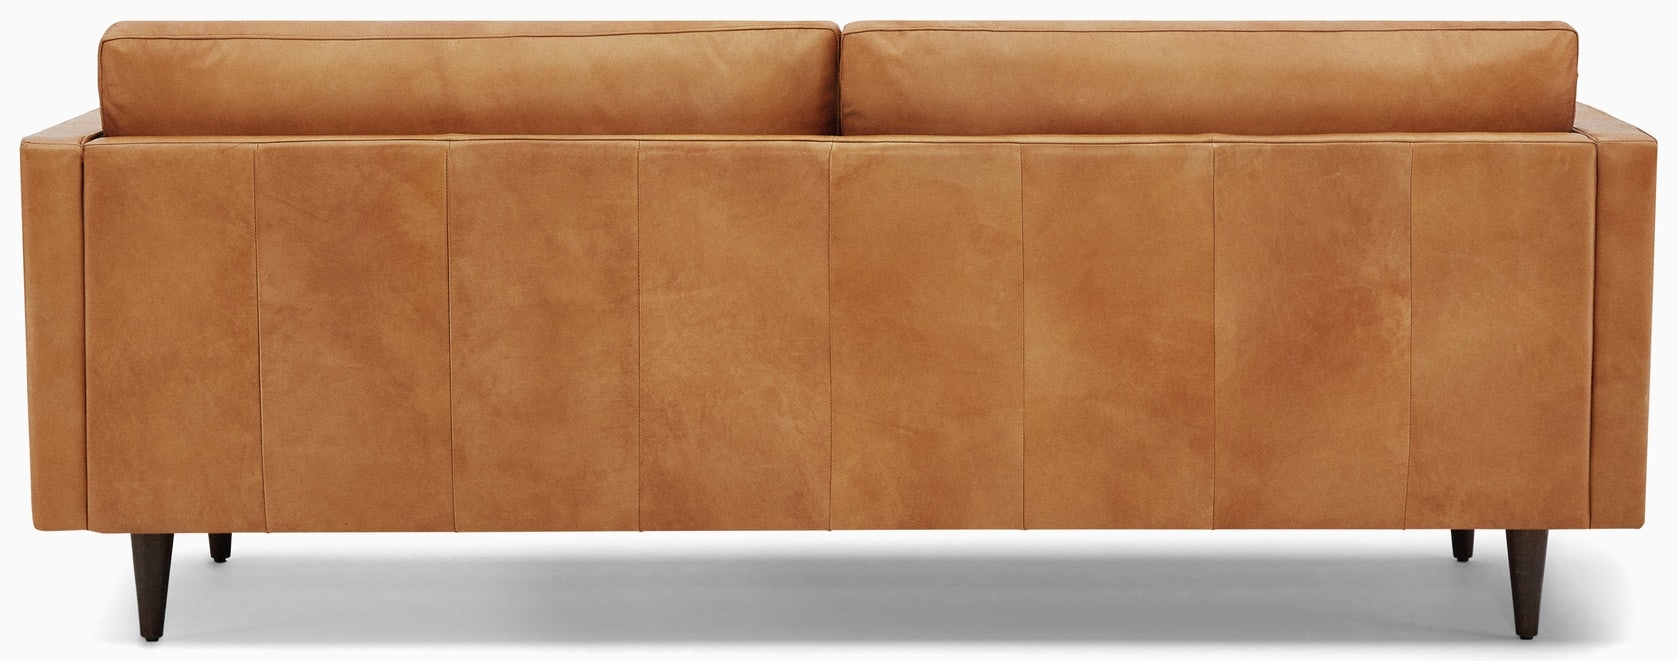 Briar Leather Sofa in Santiago Caramel Leather with Mocha Wood Stain - Image 4